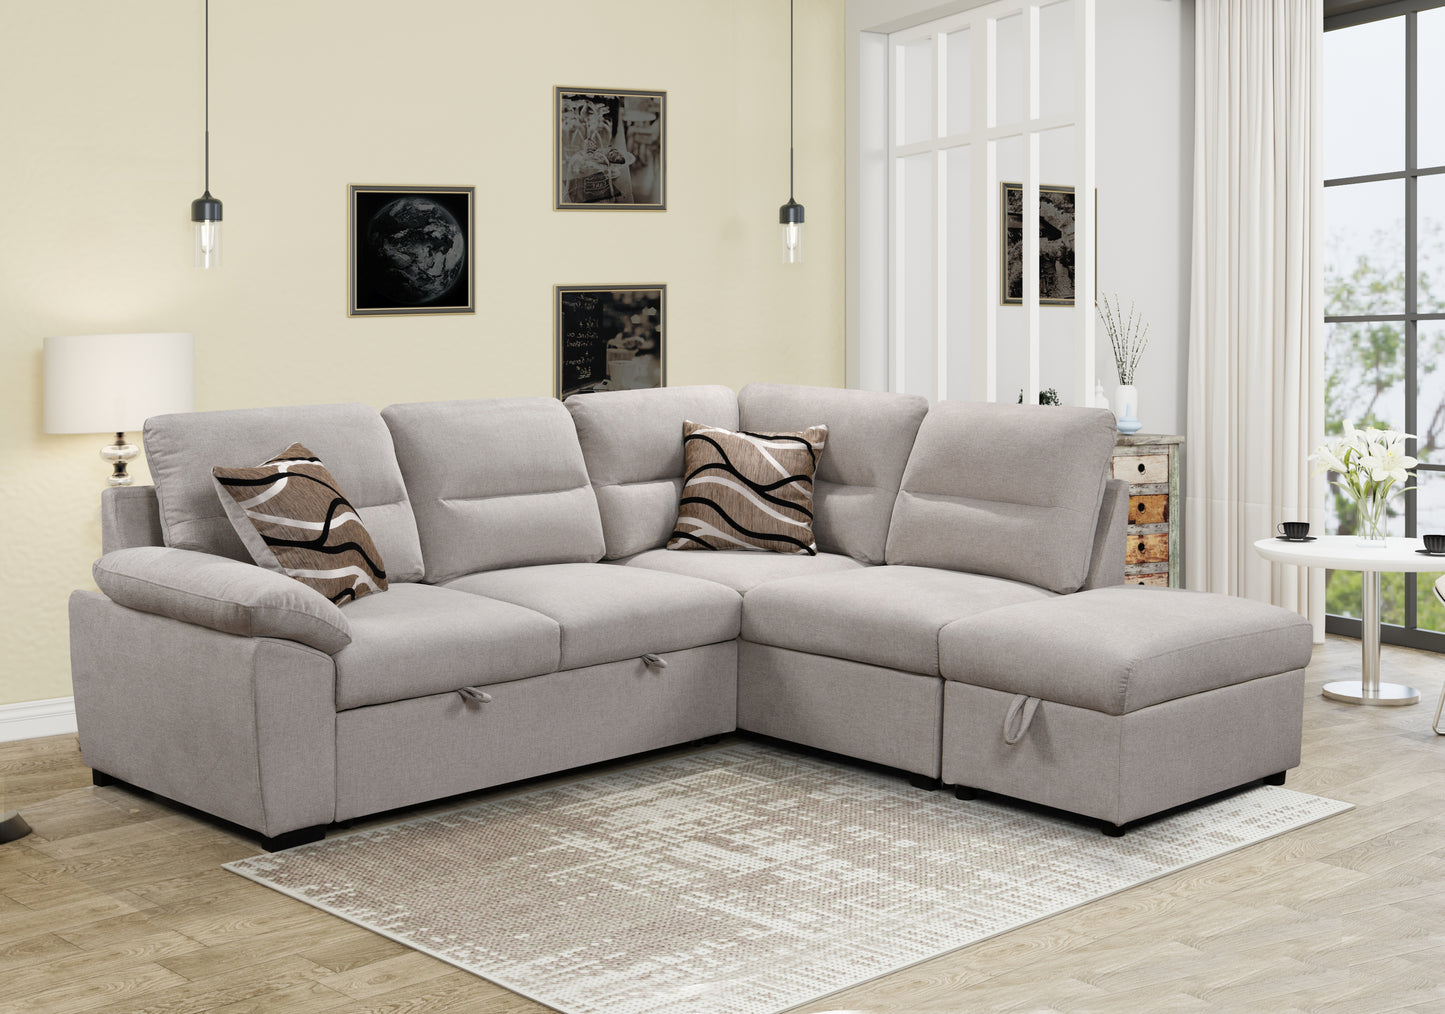 95'' Sectional Sofa with Ultra Soft Back Cushion,Sleeper Sectional Sofa with Pull Out Couch Bed and Storage Ottoman,Beige